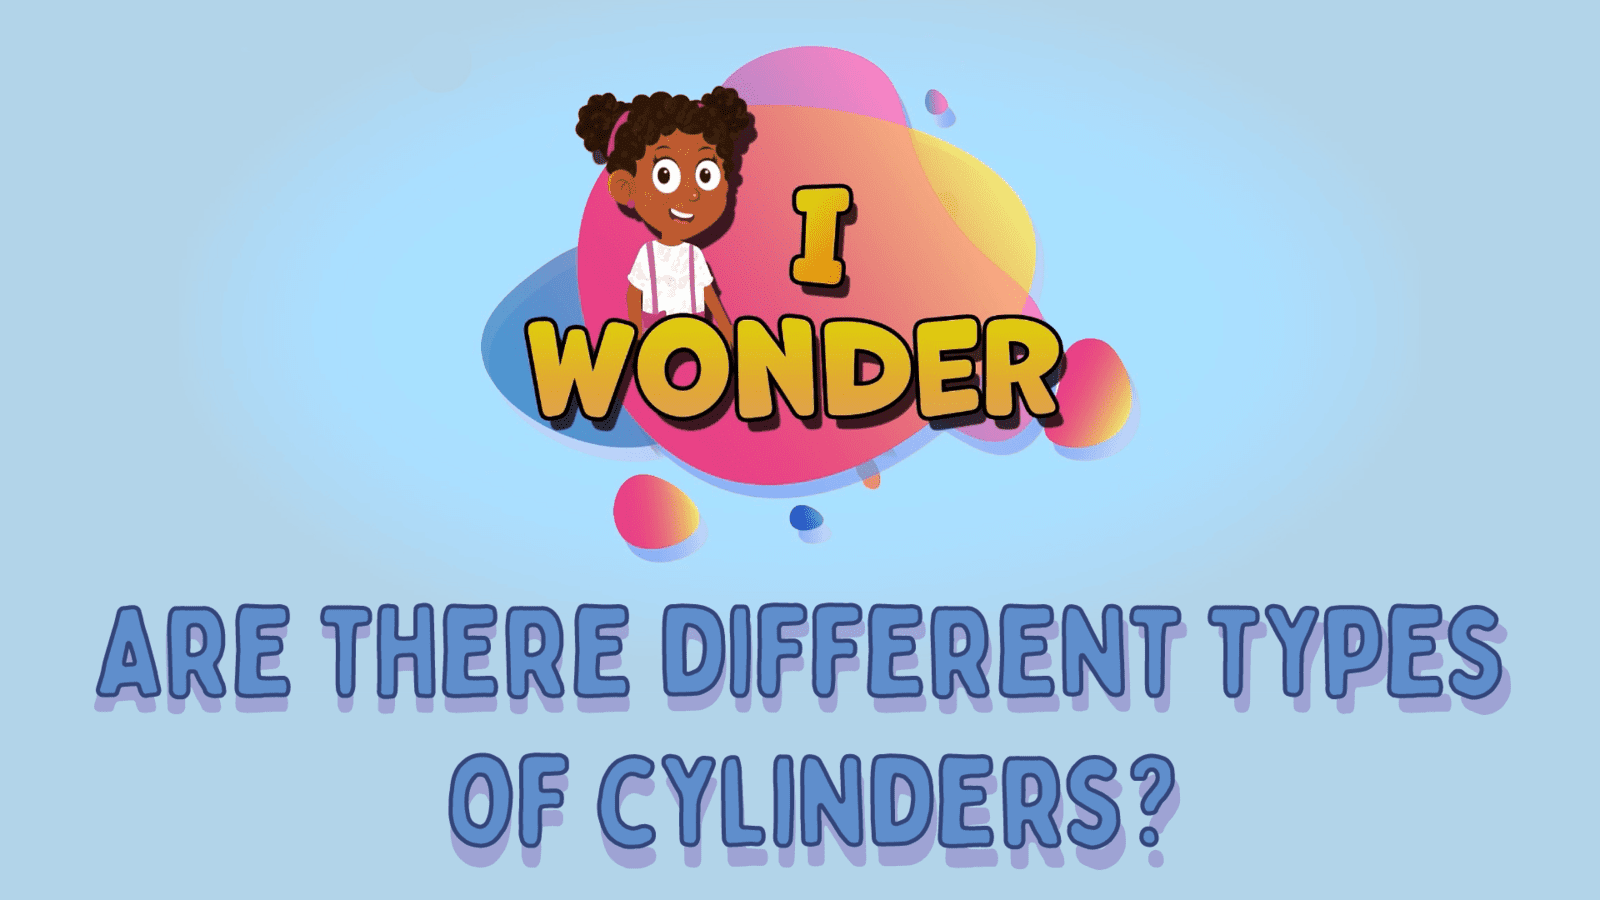 Are There Different Types Of Cylinders?